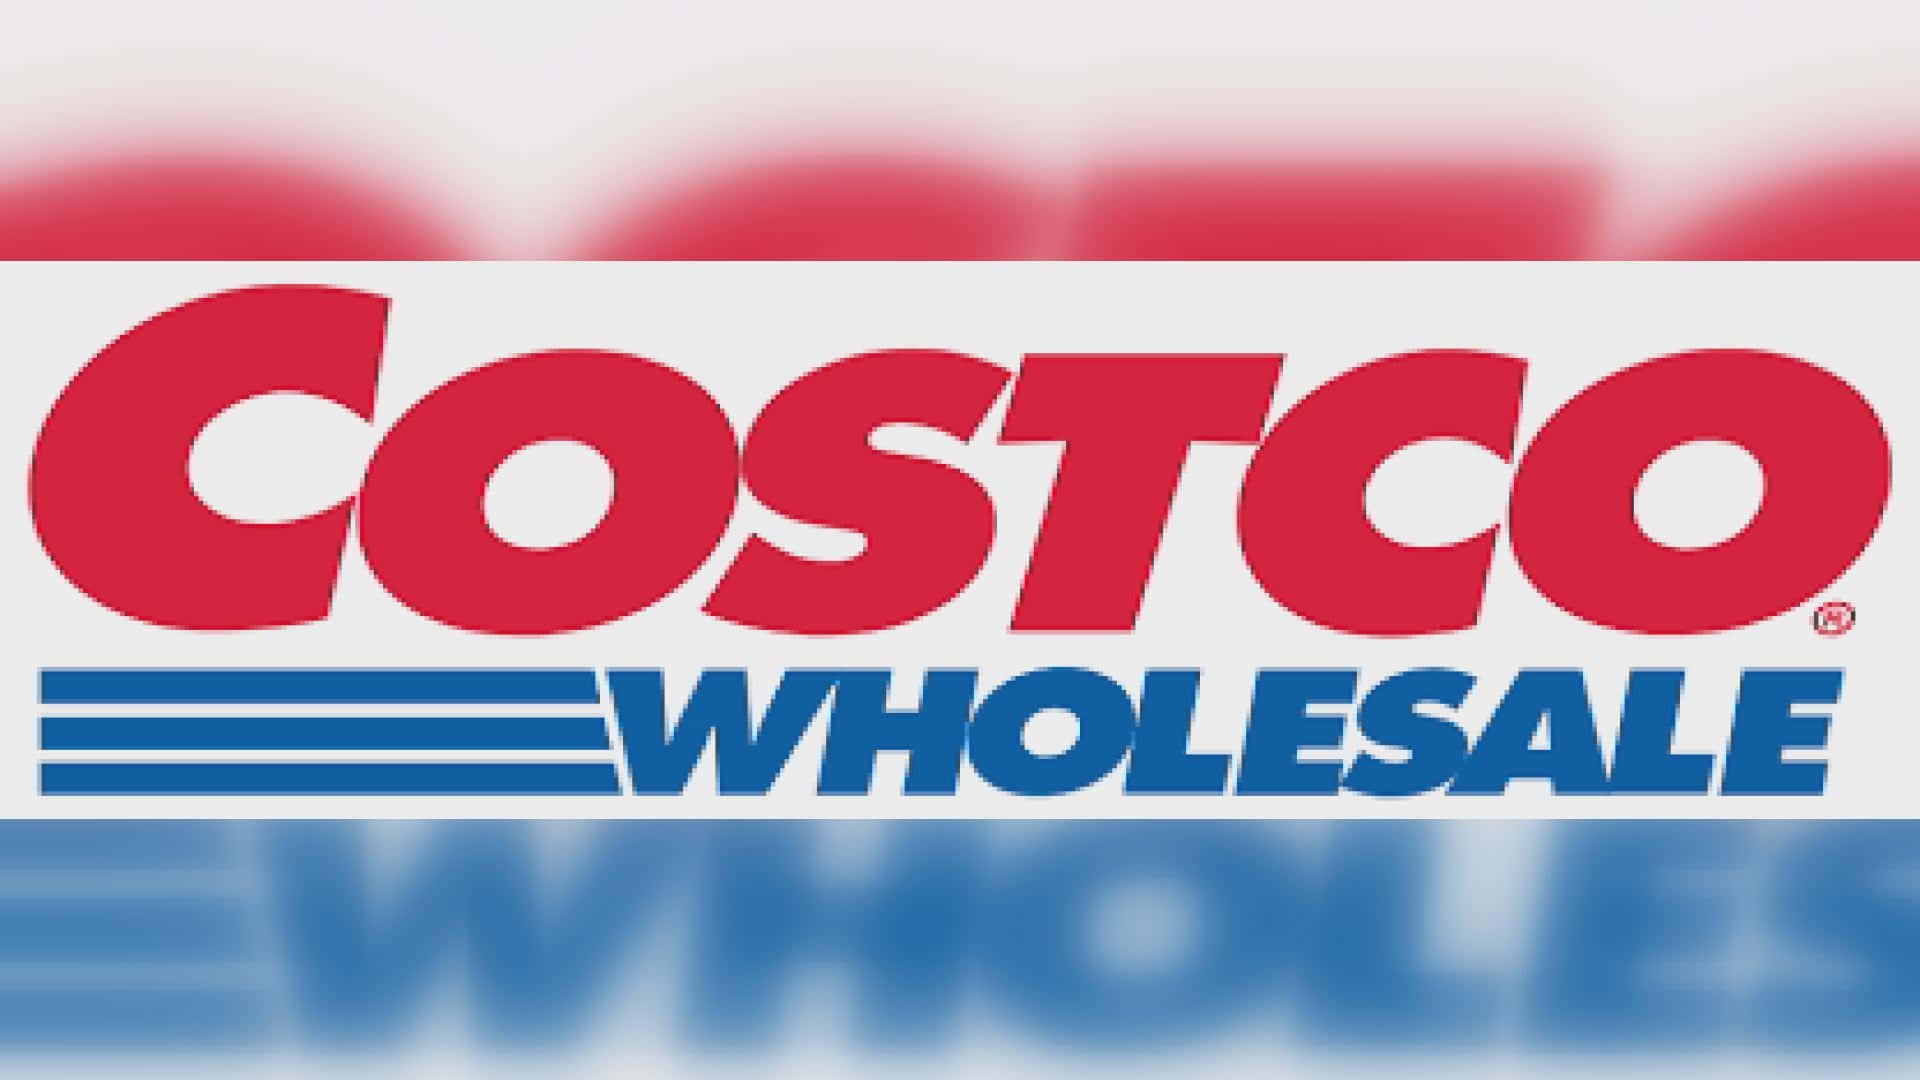 Costco Wholesale Logo With A Blurred Background